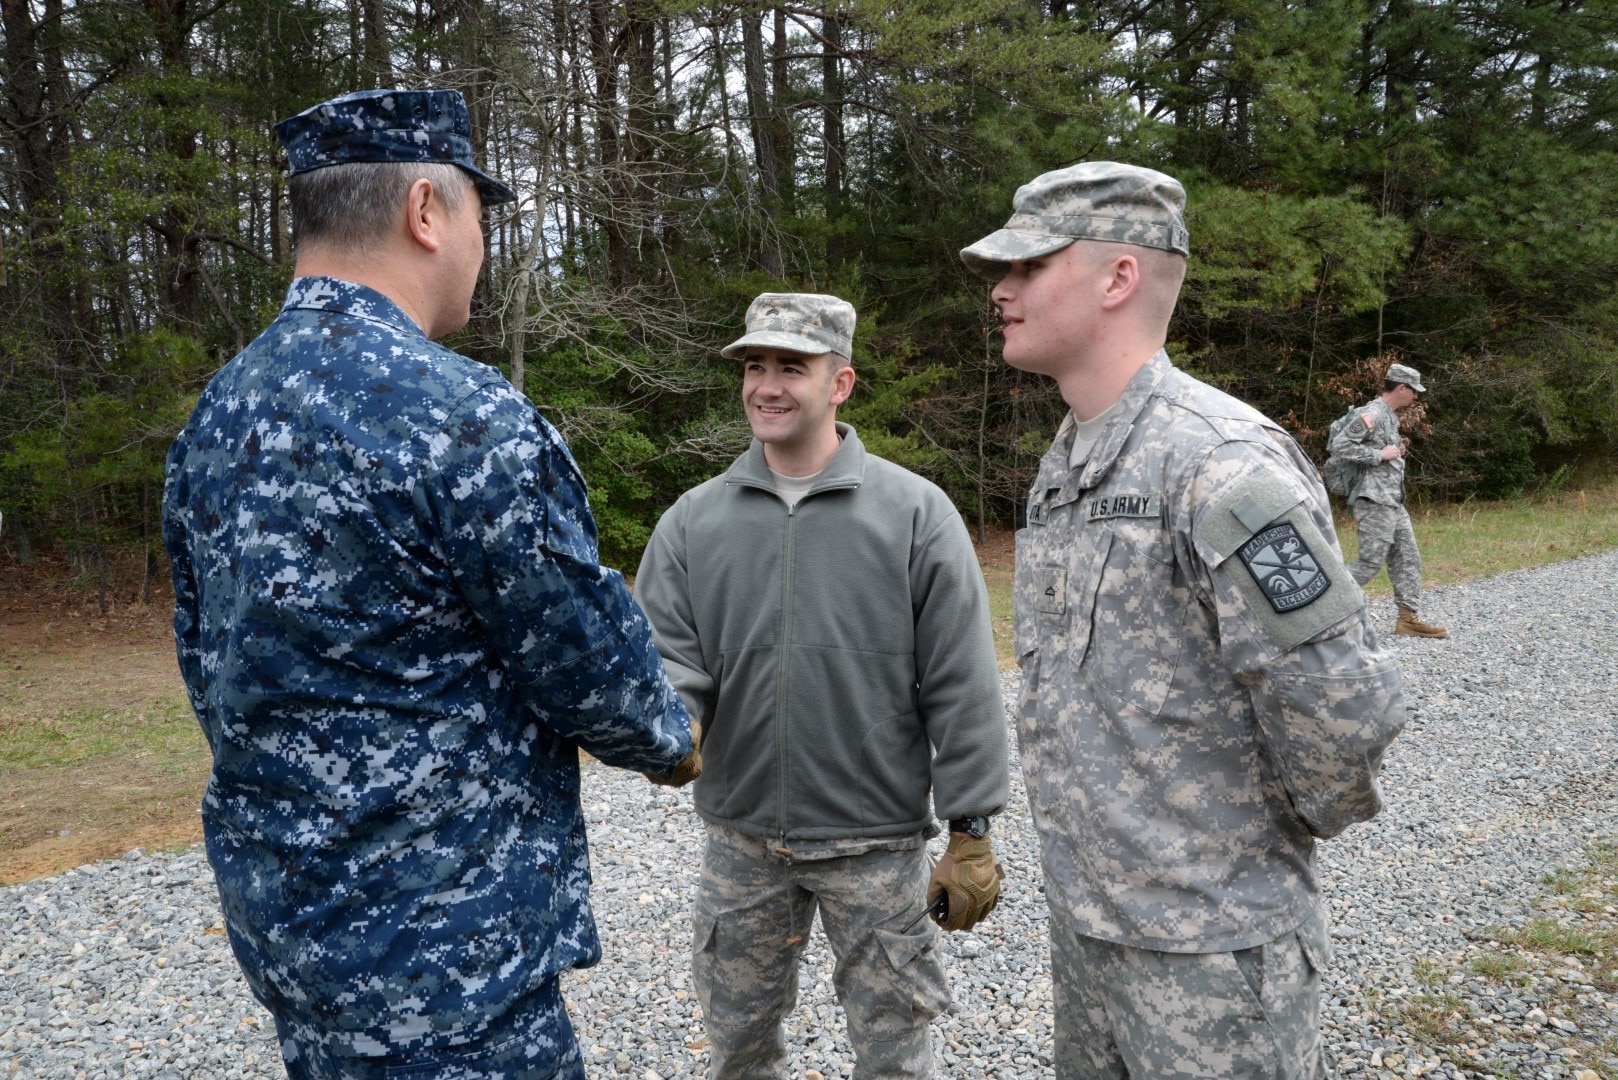 DLA JRF Director, Rear Adm. Ron MacLaren, talks to ROTC Cadets during weapons training at Fort A.P. Hill, Va., April 2. The goal of the two day training was to gain familiarization with the weapons for combat readiness and to qualify for deployments.